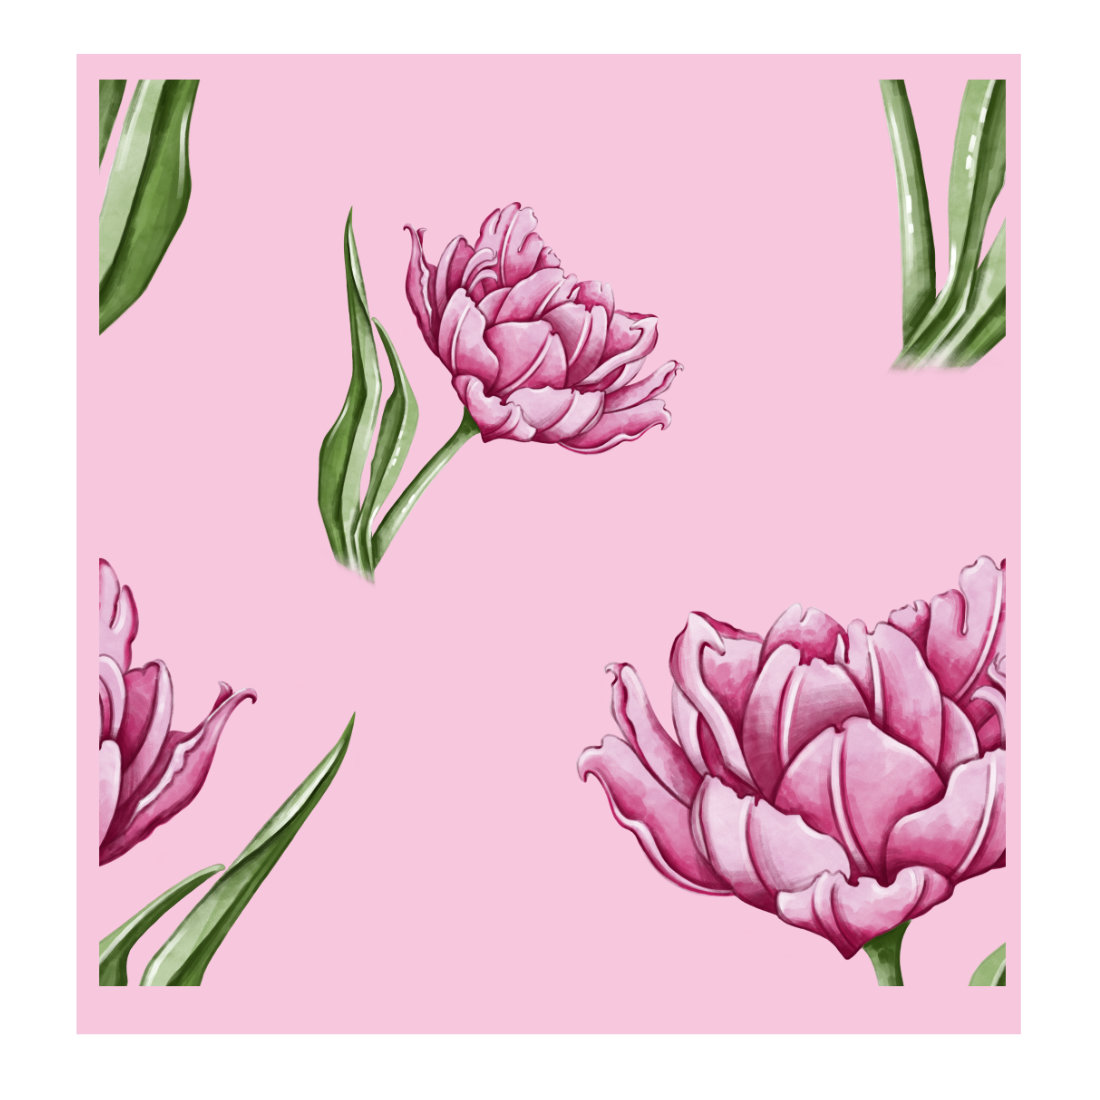 Pink flower with green leaves on a pink background.